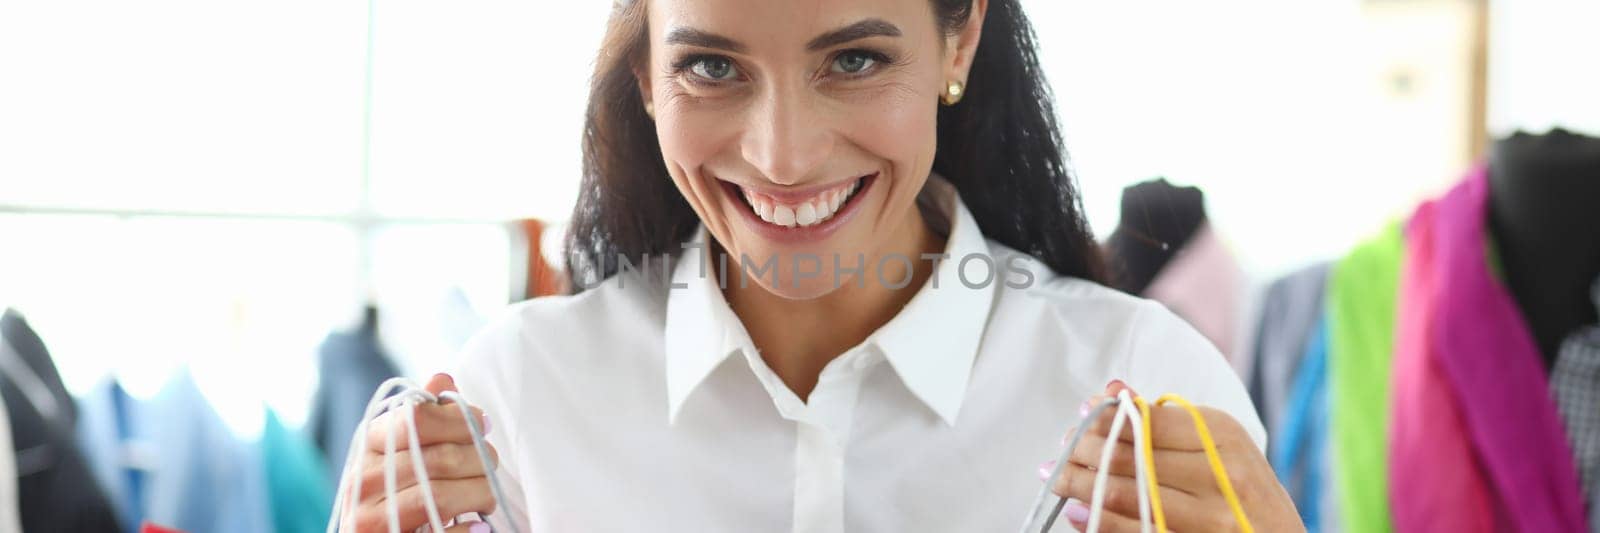 Satisfied happy woman with bright shopping bags buys packages and enjoys discounts. Girl smiling broadly showing bought gifts for holidays sale concept